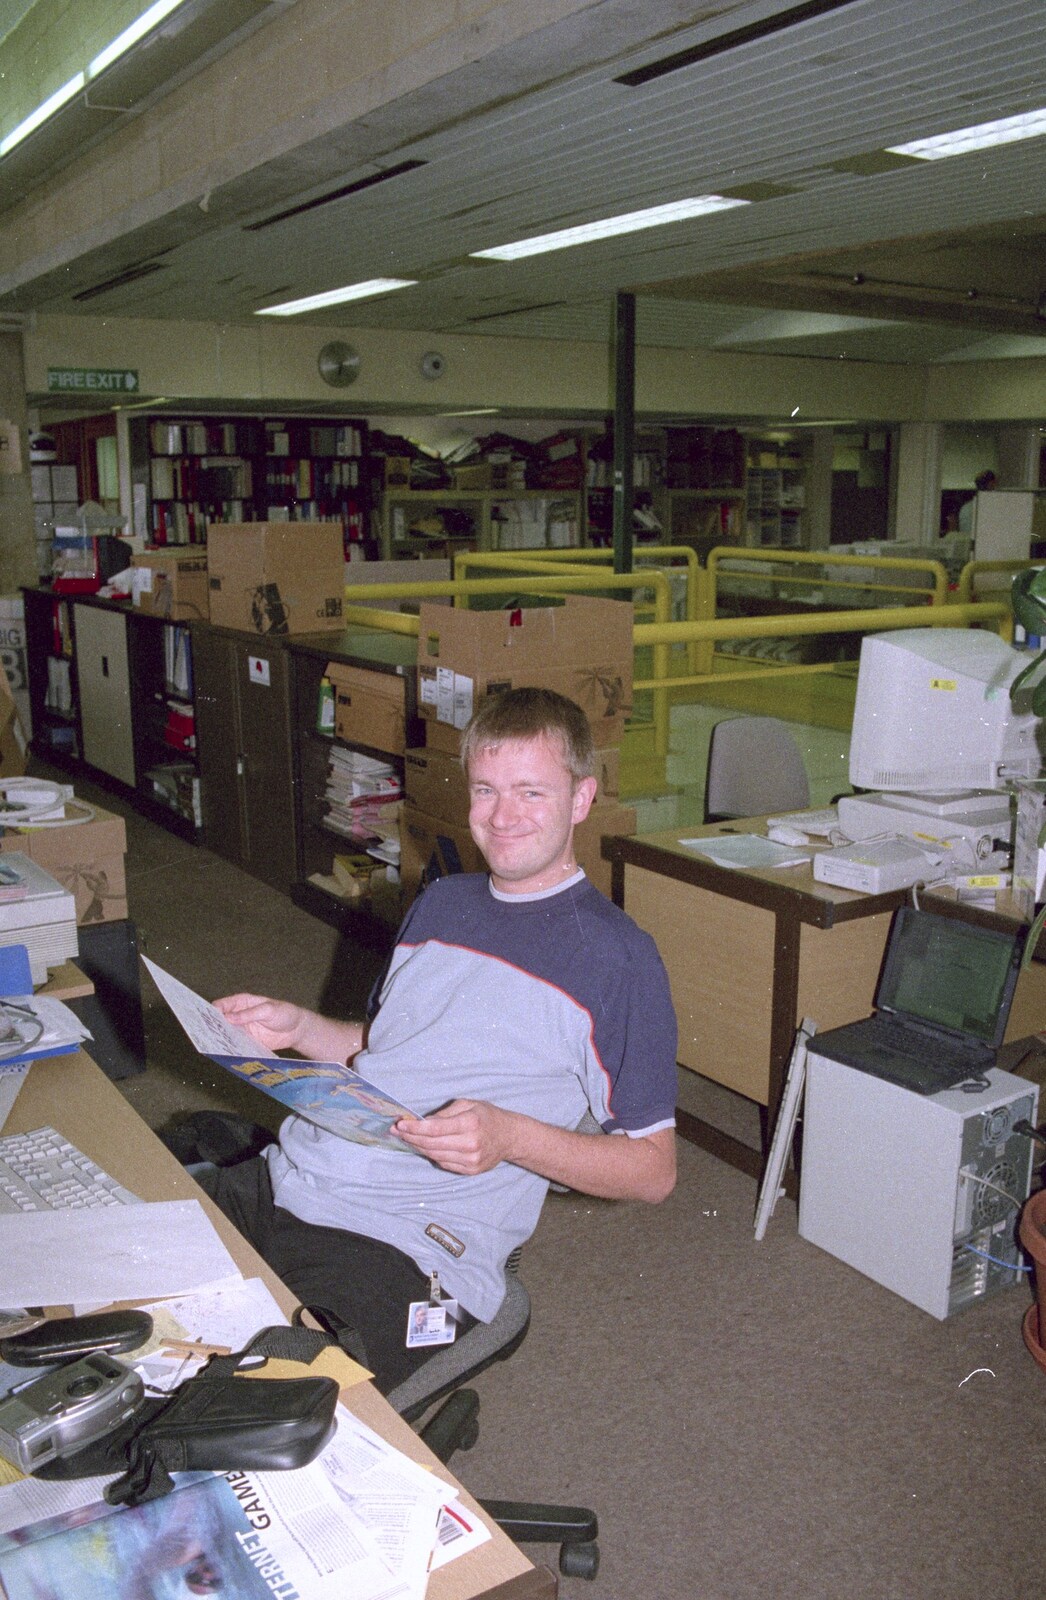 Nosher's Last Day at CISU/SCC, Suffolk County Council, Ipswich - 22nd June 2000: Nosher looks up from his desk